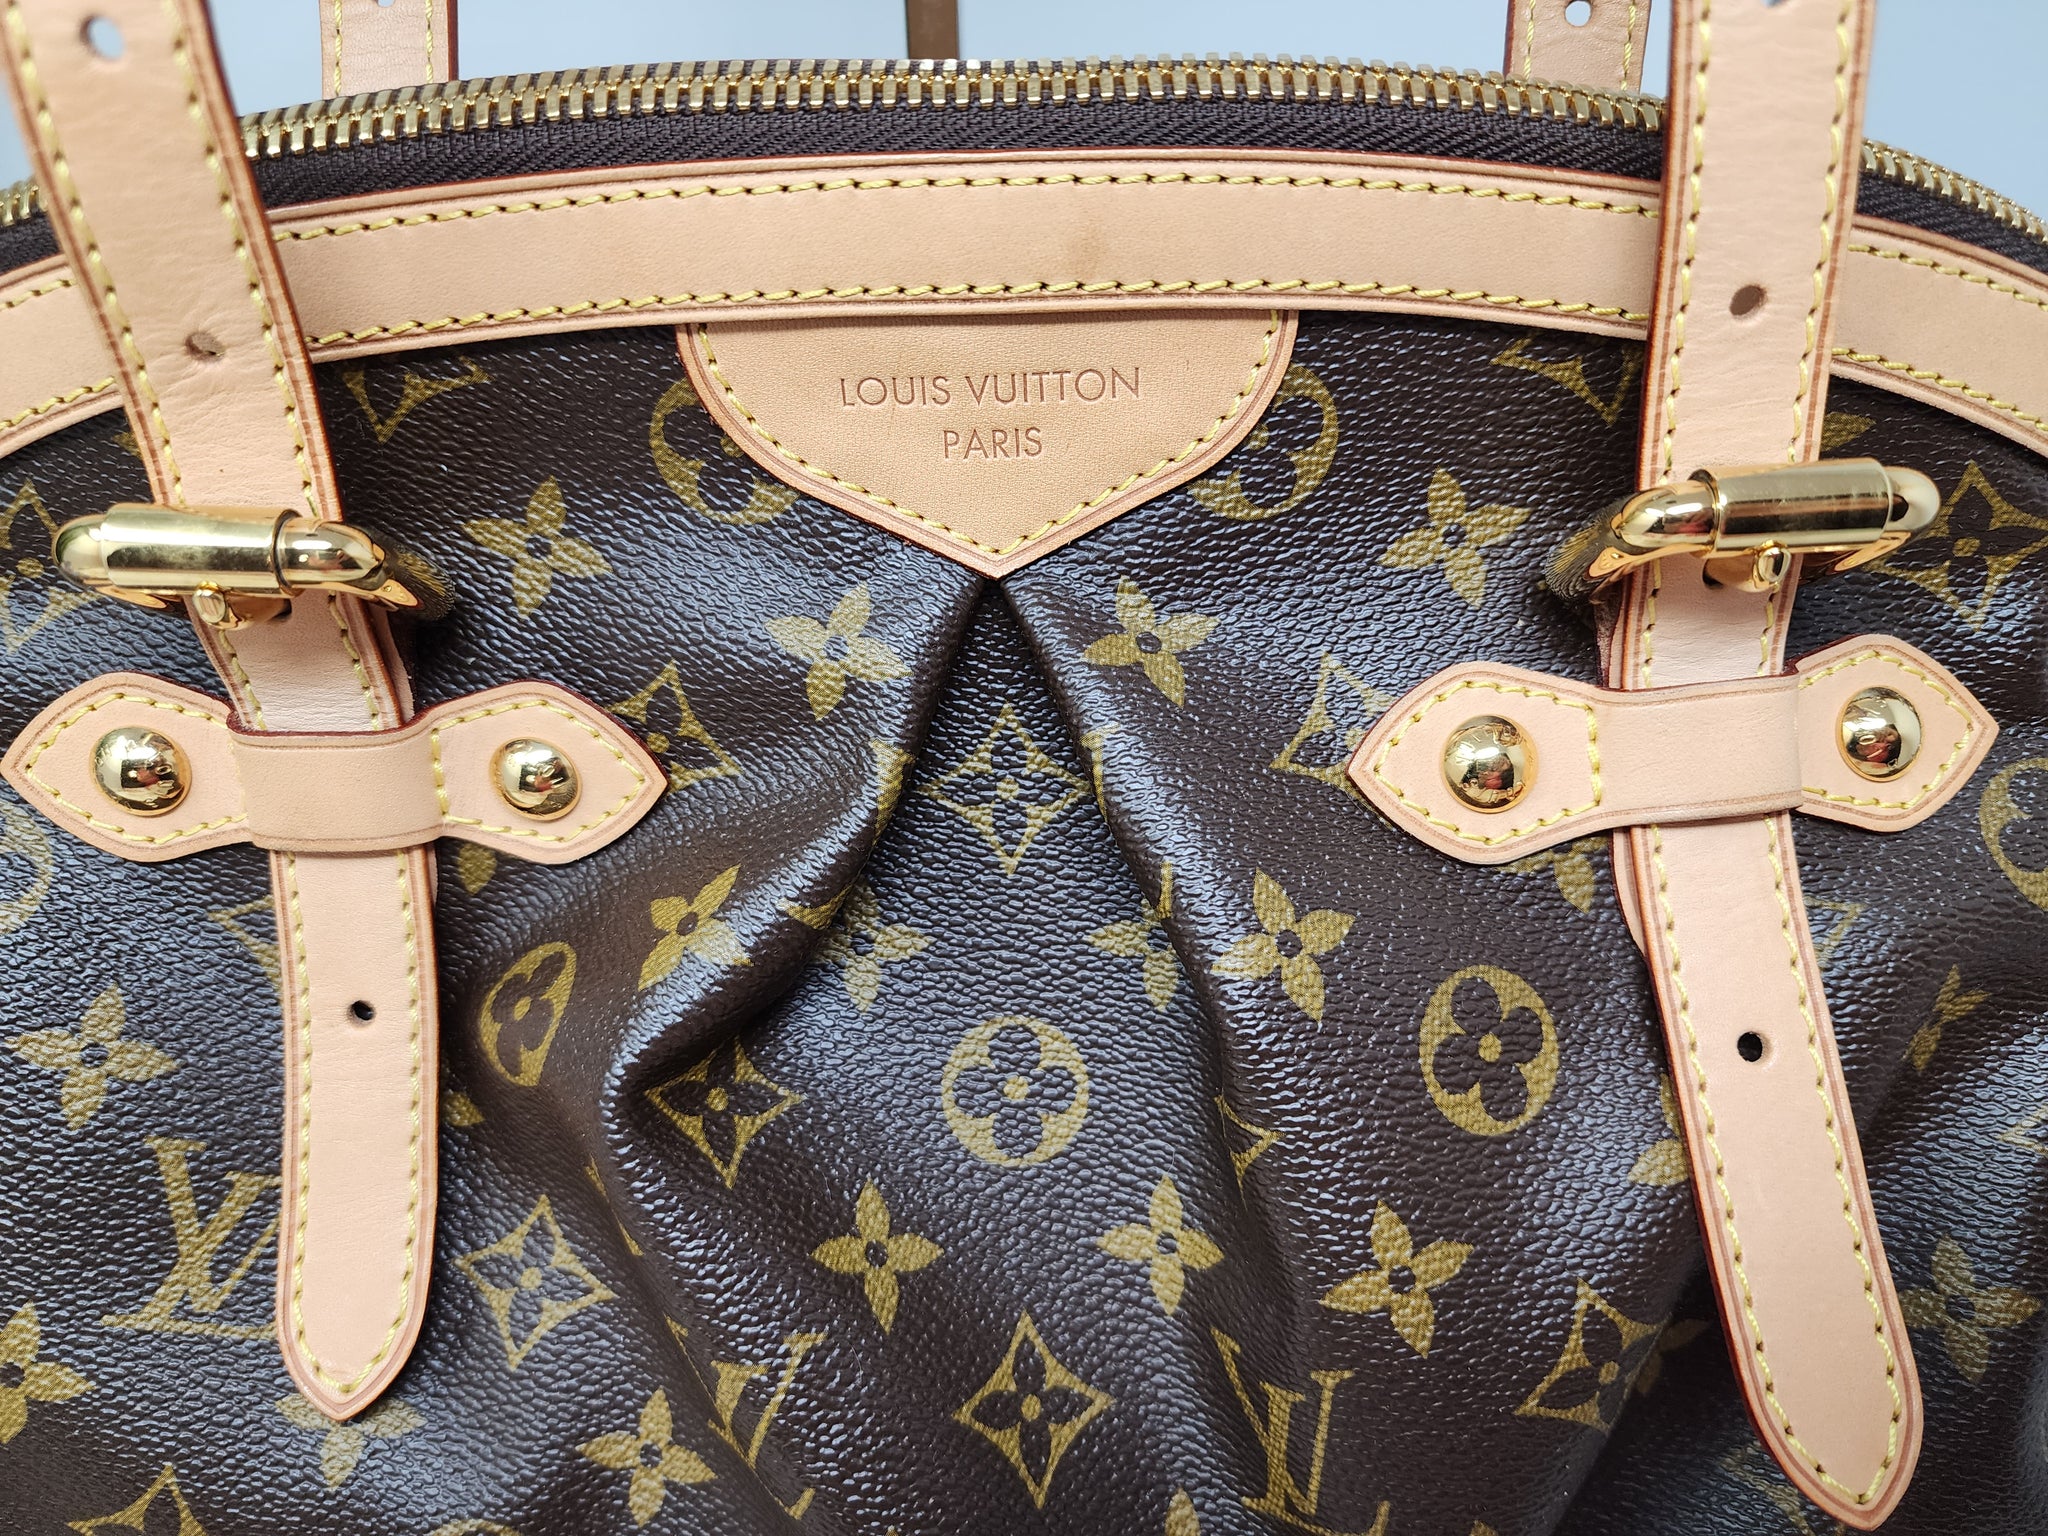 Louis Vuitton, Bags, Brand New Authentic Louis Vuitton Tivoli Gm Is The  Perfect Handbag For Fall